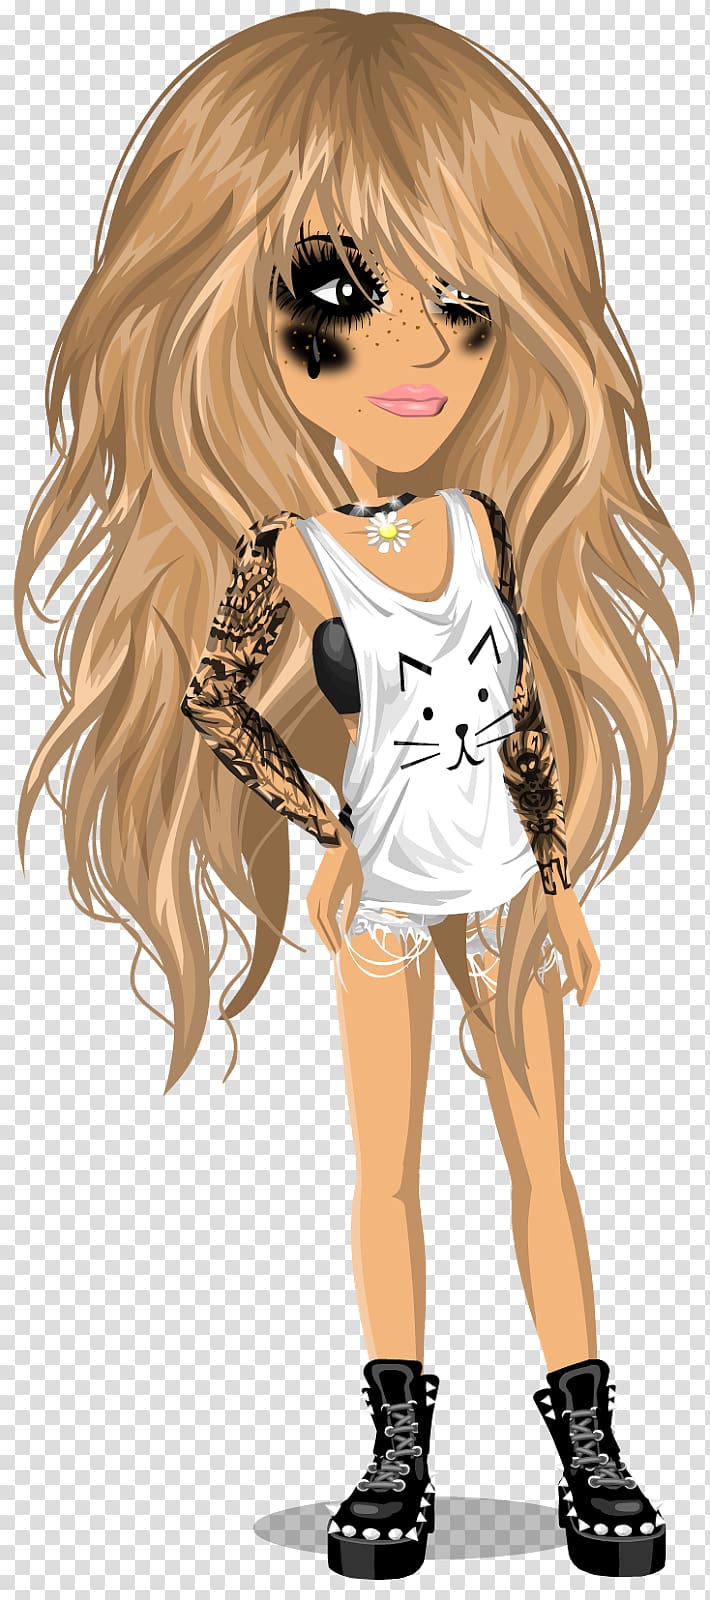 Moviestarplanet Blond Doll Hair, doll transparent background PNG clipart